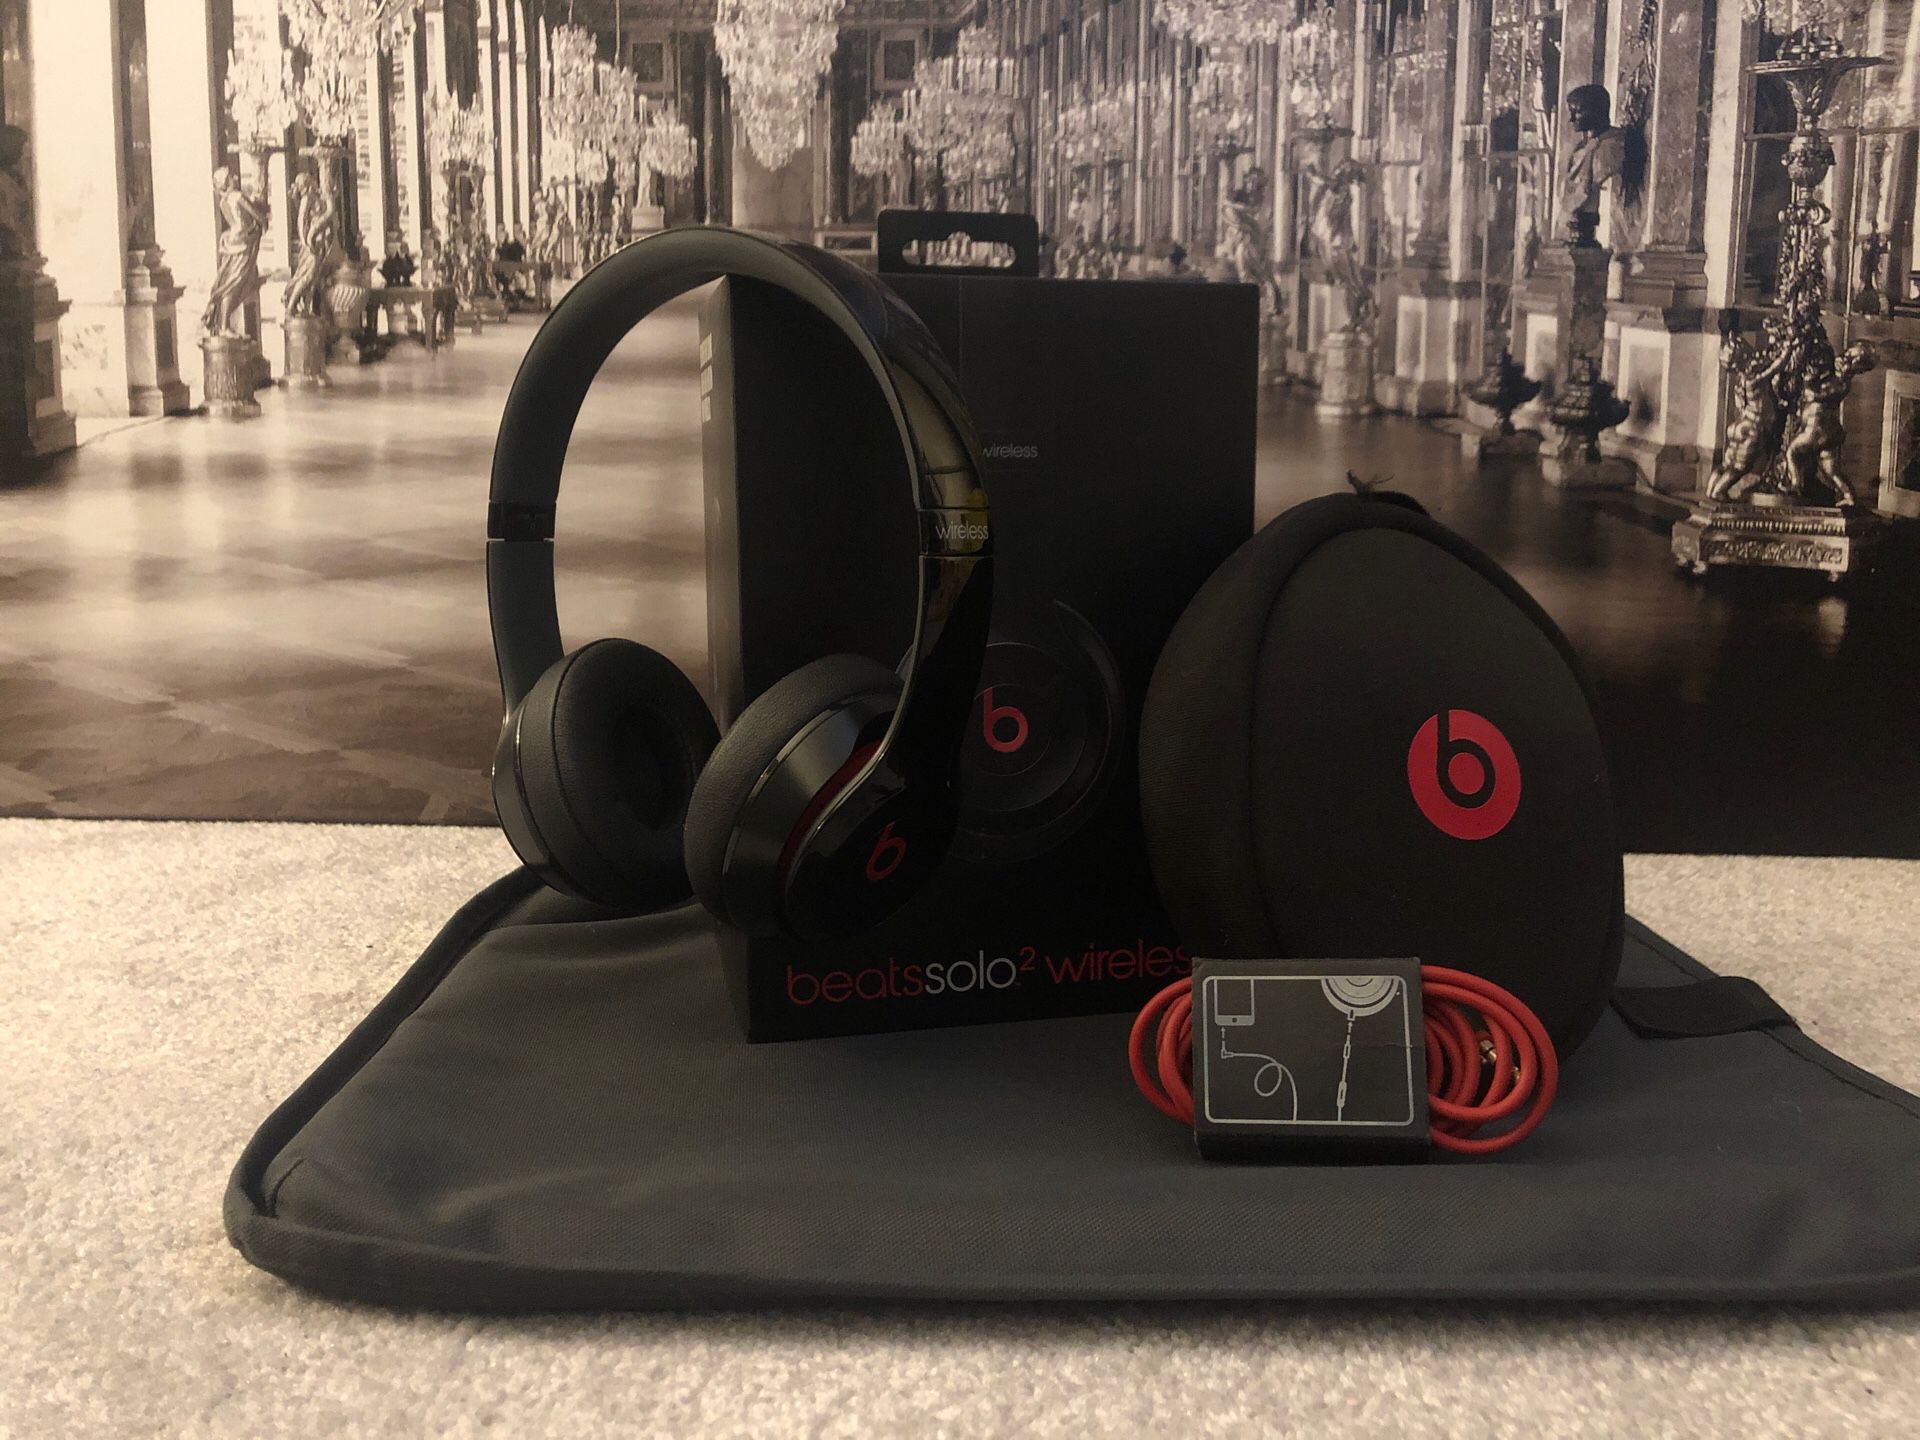 Beats Solo 2 Wireless (Used) - Black & Red